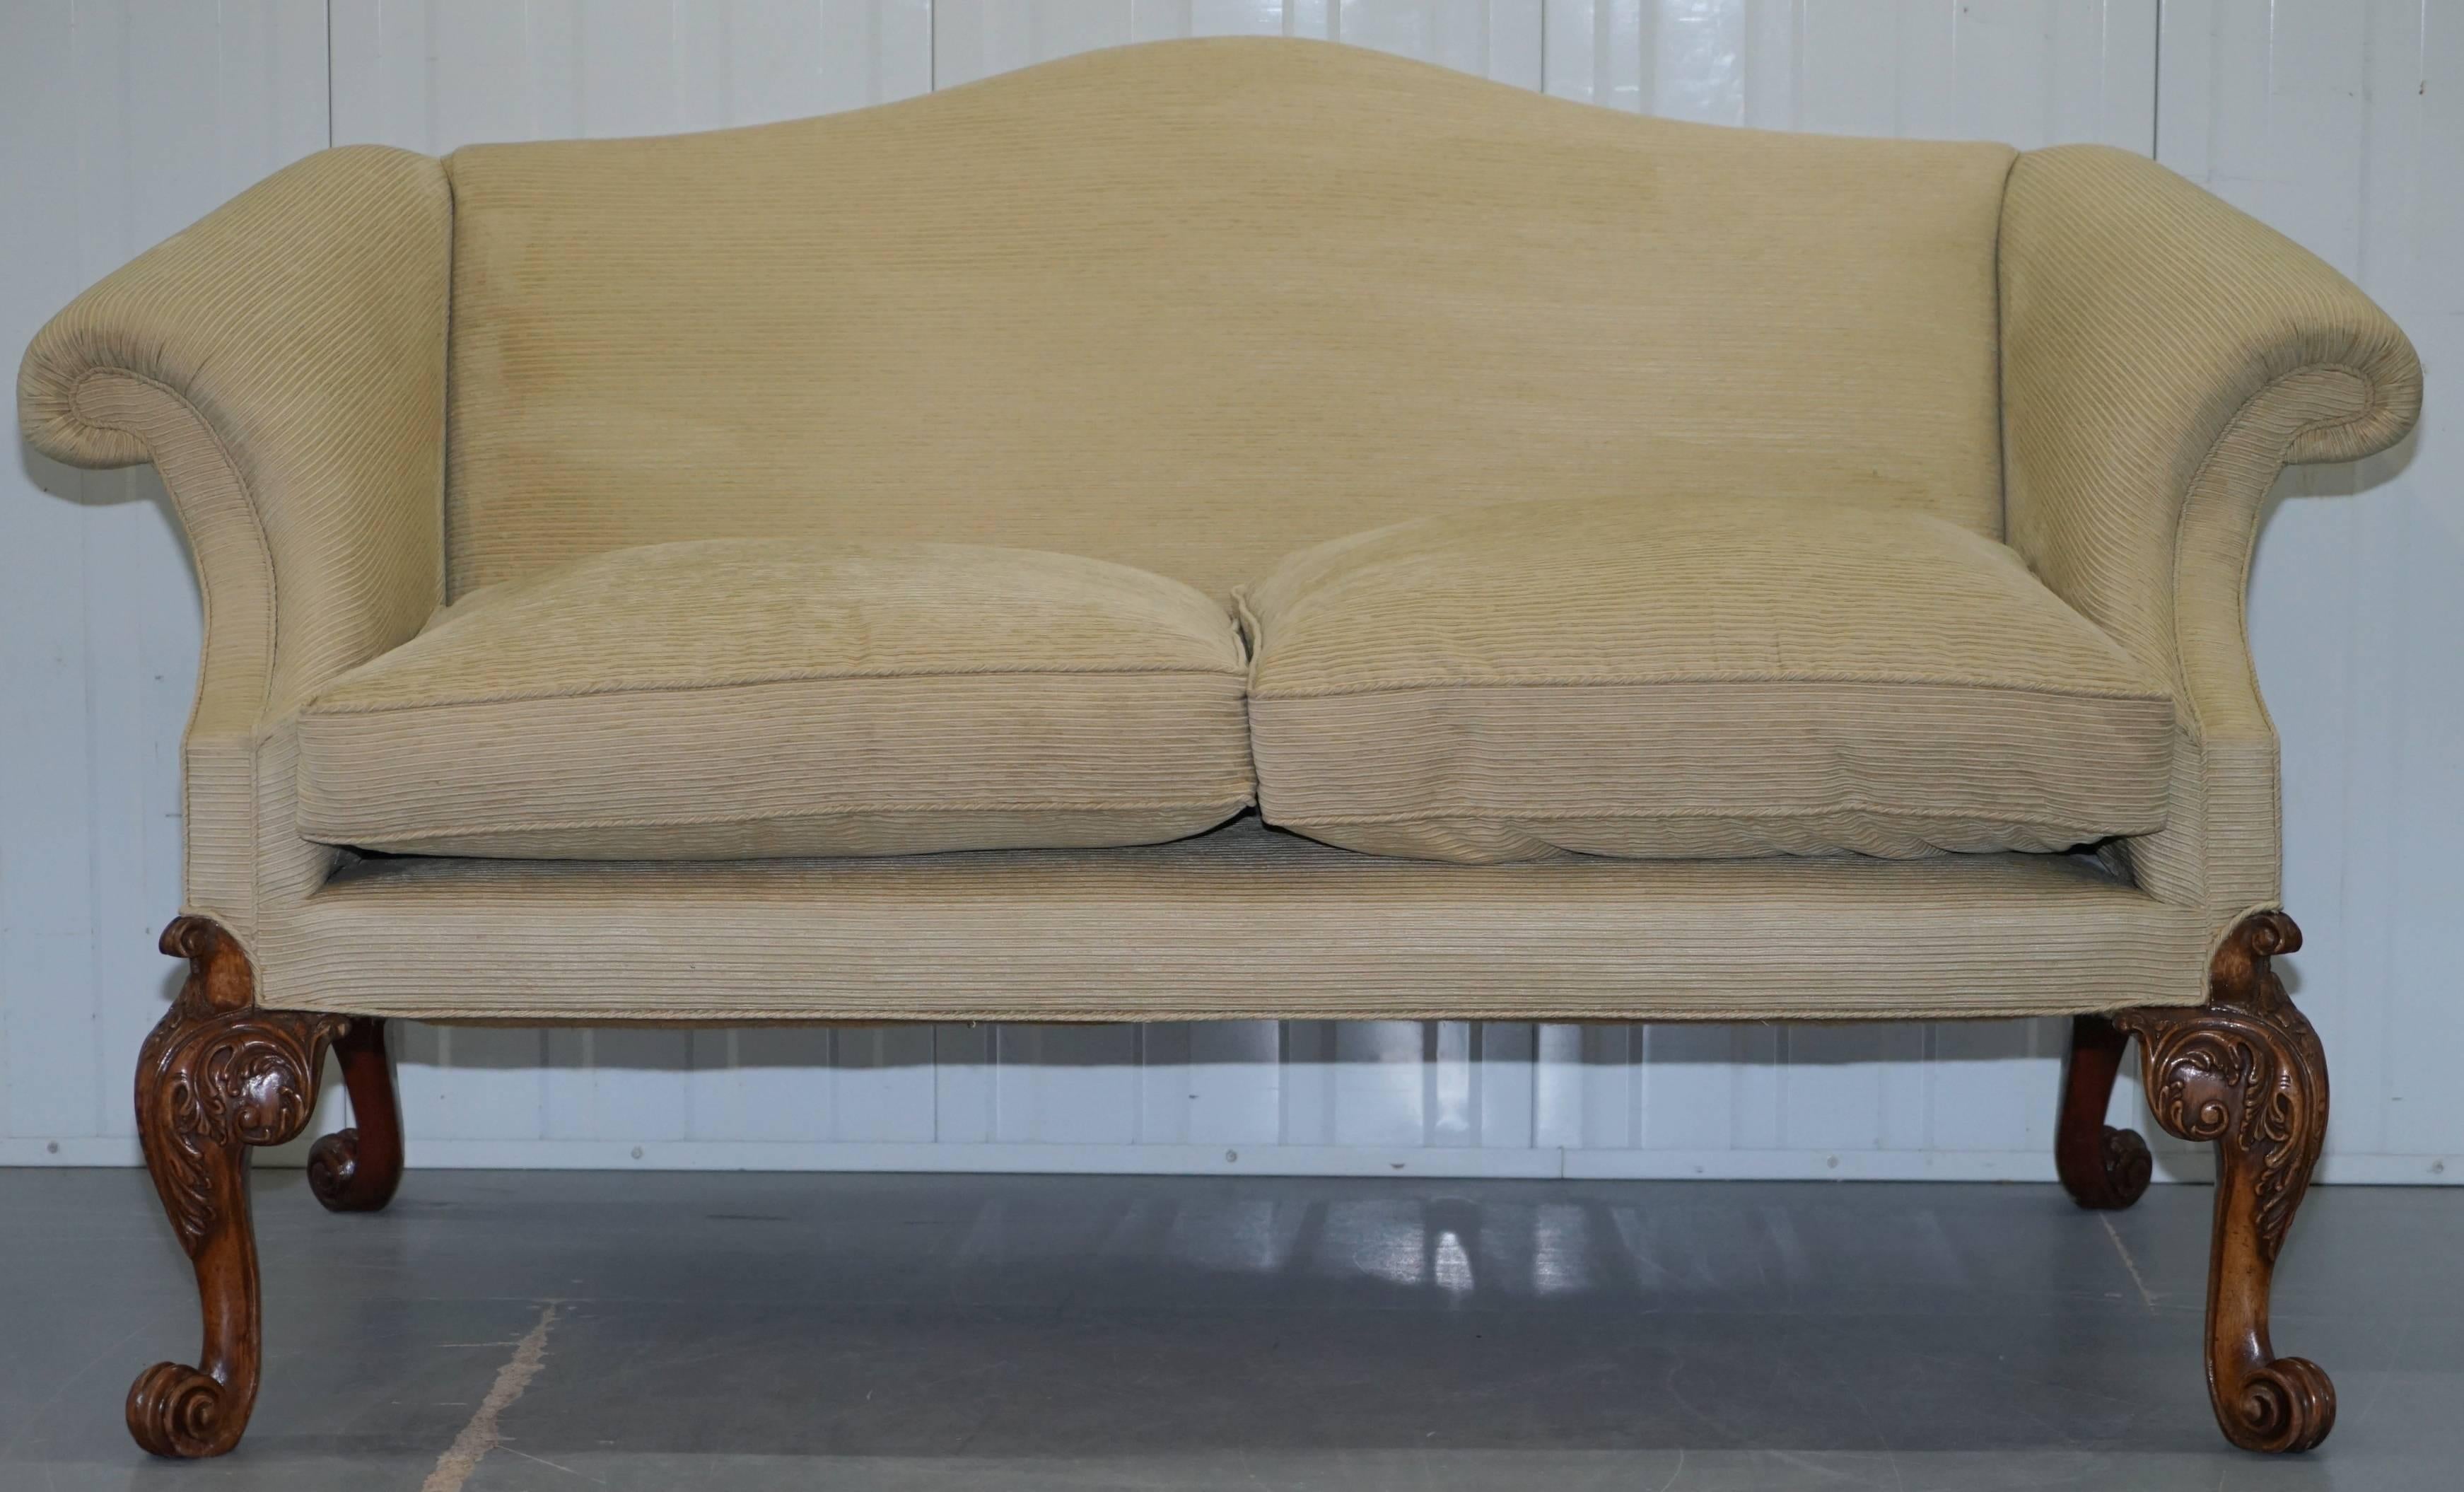 We are delighted to offer for sale this lovely pair of walnut framed Georgian Irish hump/camelback sofas

This auction is for one with the option to buy the pair by changing the quantity amount

A truly delightful pair, it's very rare to find a